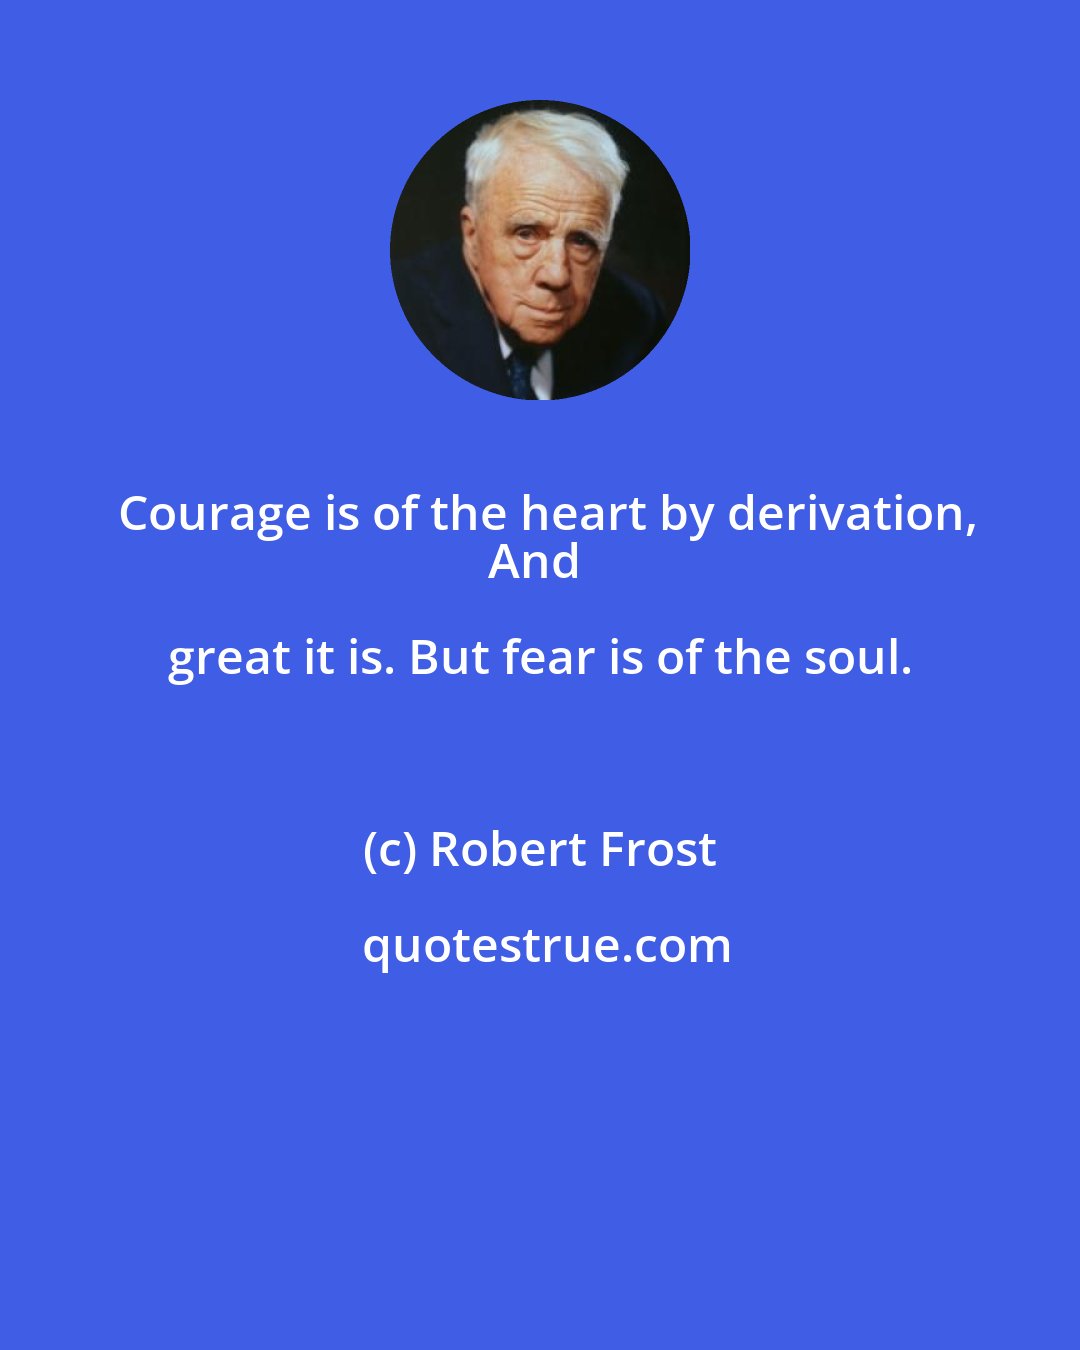 Robert Frost: Courage is of the heart by derivation,
And great it is. But fear is of the soul.